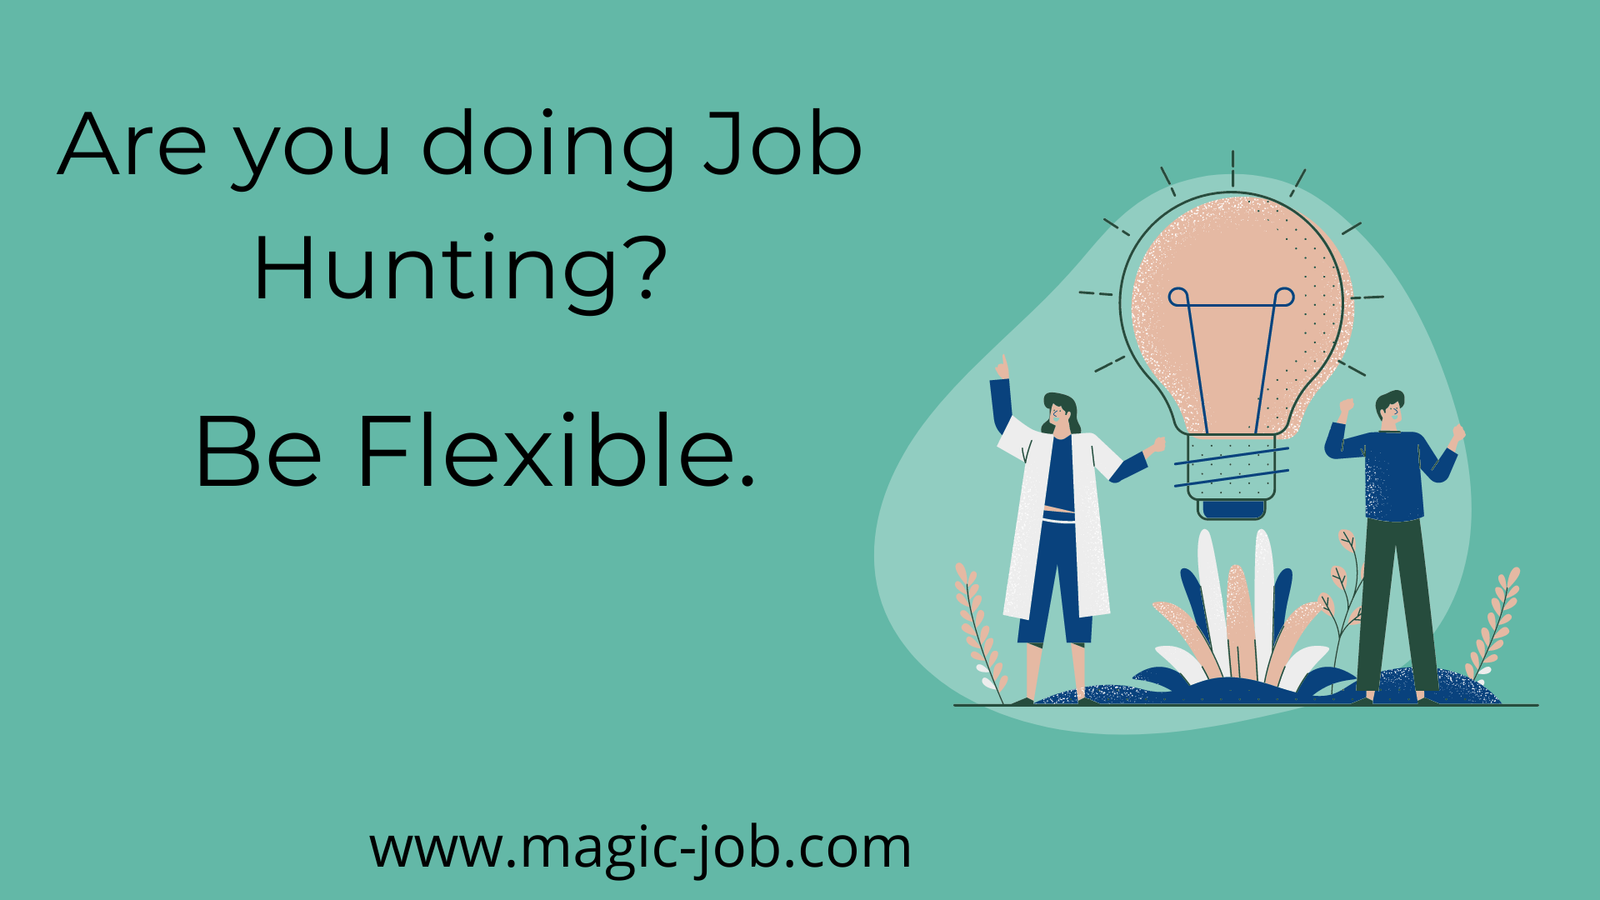 Are you doing Job Hunting? Be Flexible! image